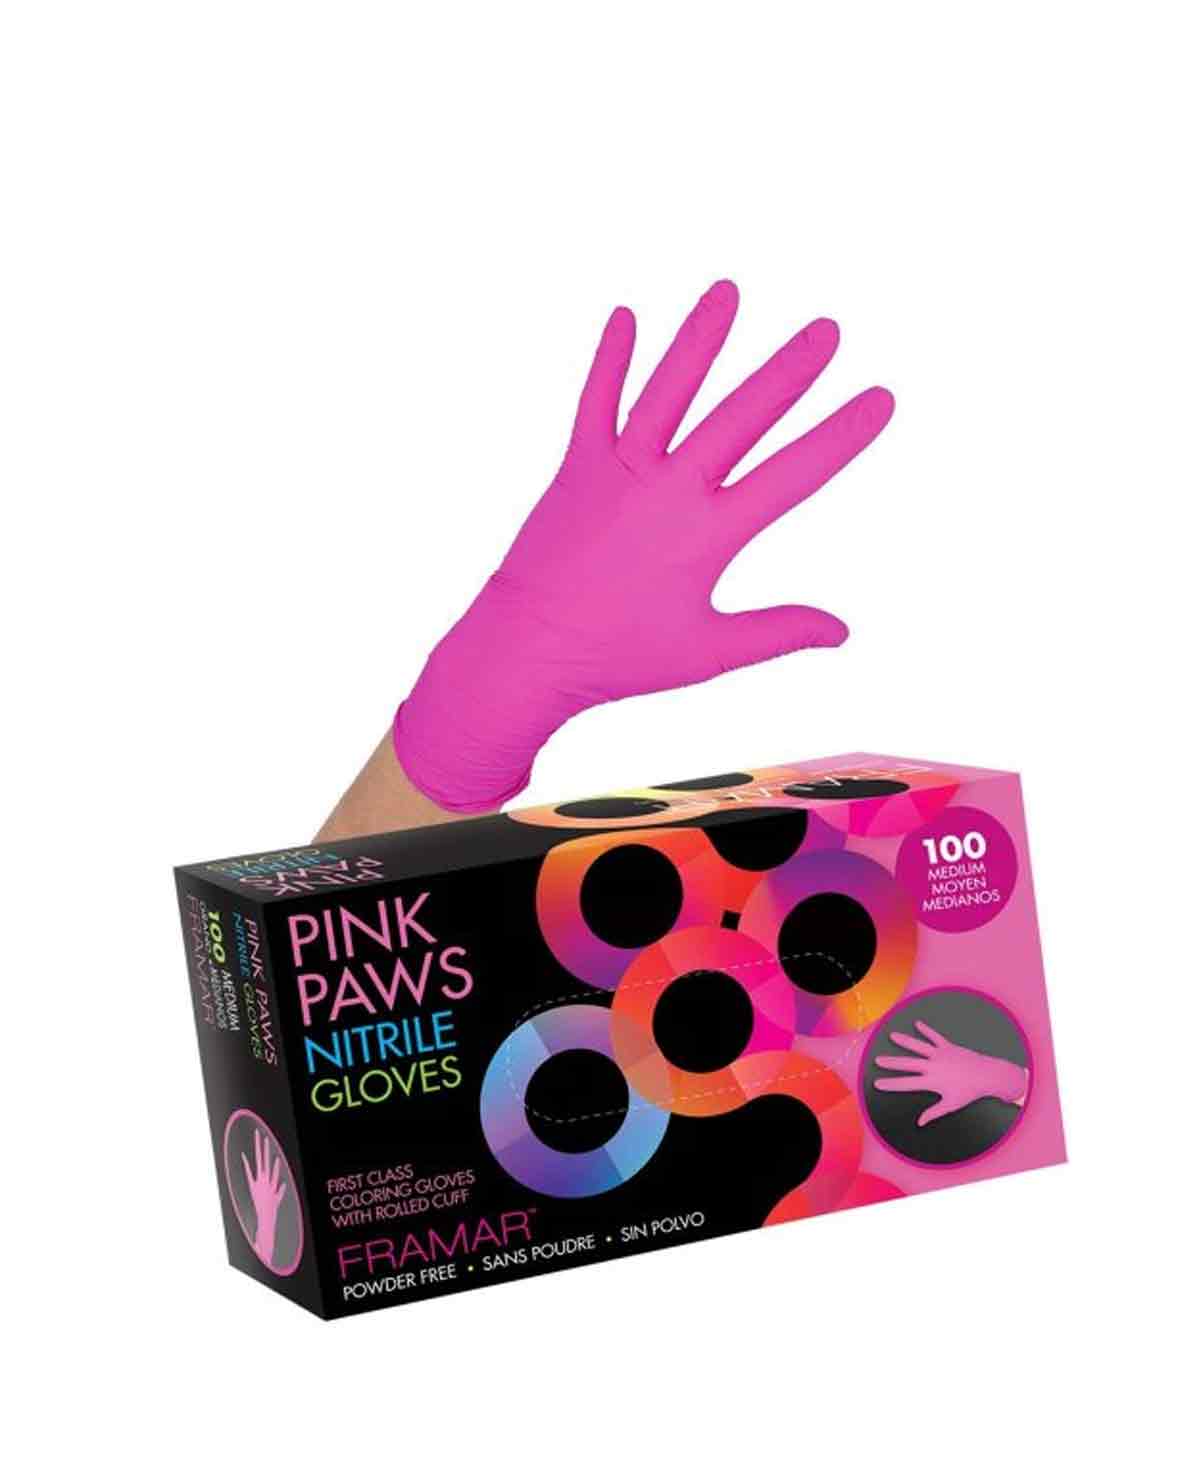 Framar Pink Paws Nitrile Gloves - Small